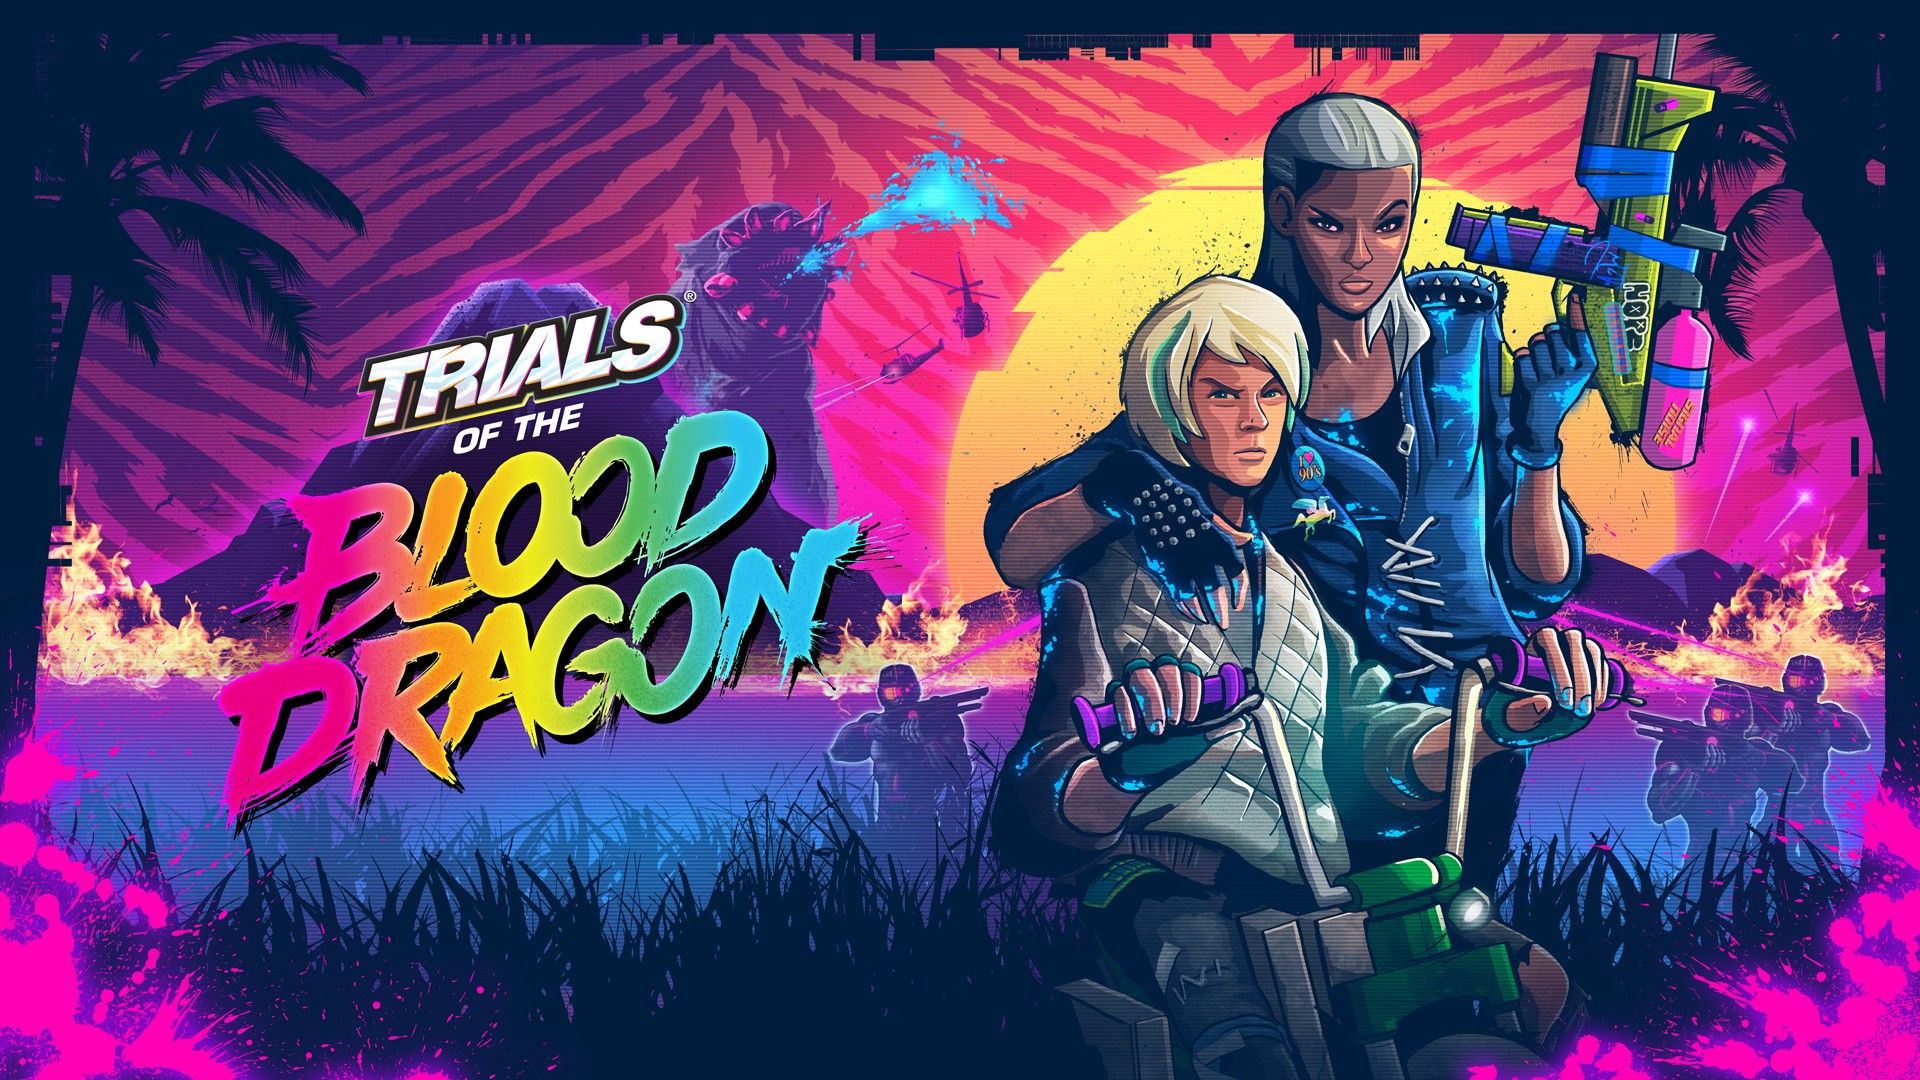 Trials Of The Blood Dragon wallpaper, Video Game, HQ Trials Of The Blood Dragon pictureK Wallpaper 2019